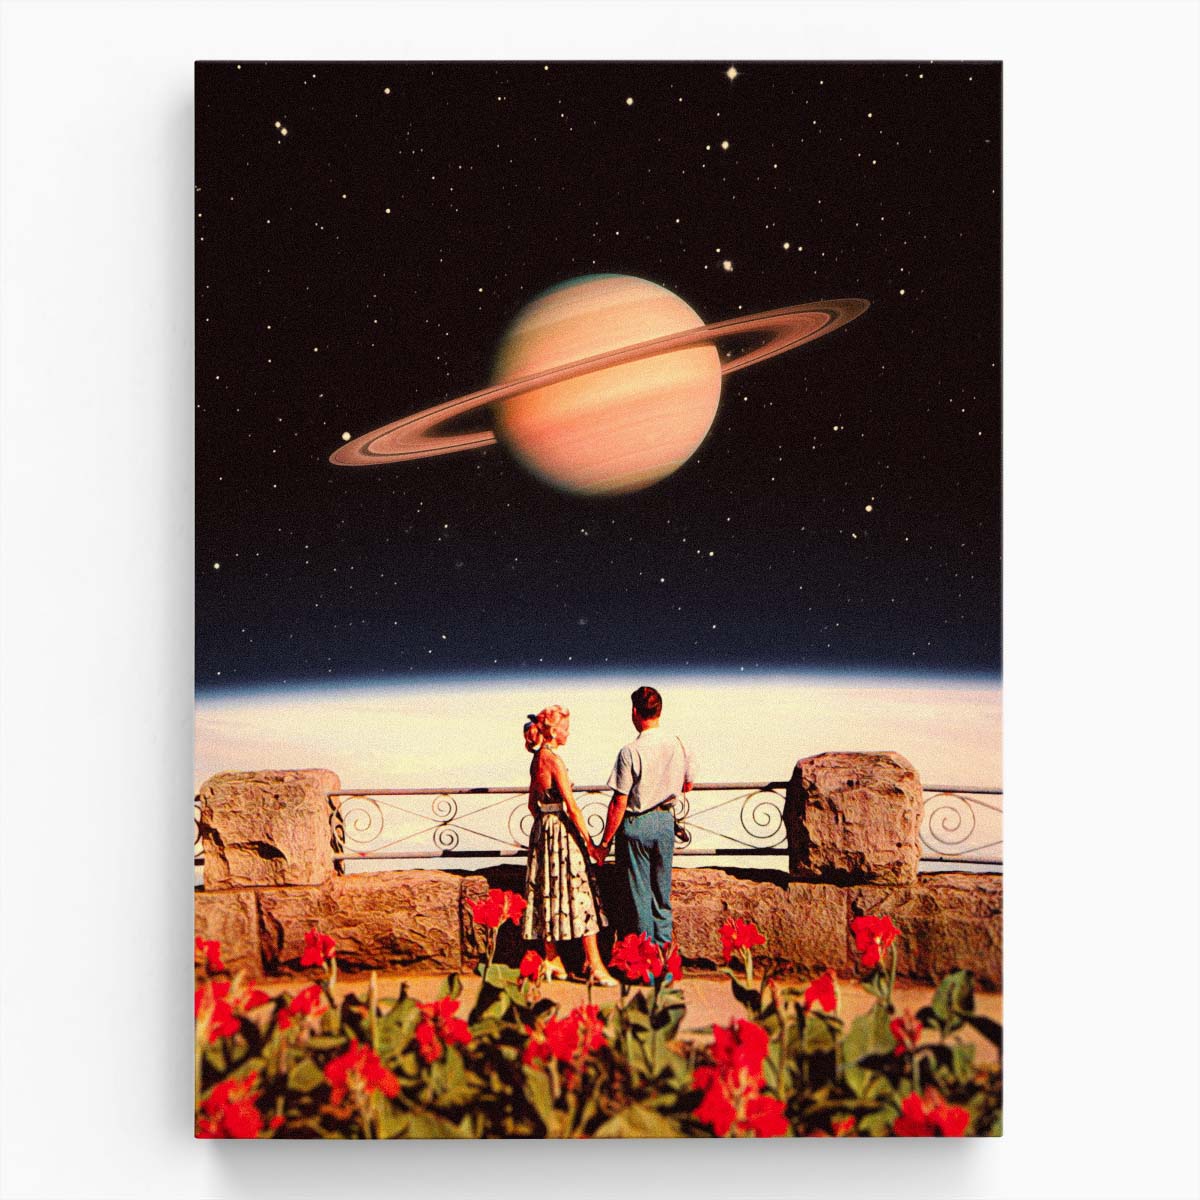 Romantic Space Adventure Digital Collage Art by Taudalpoi by Luxuriance Designs, made in USA